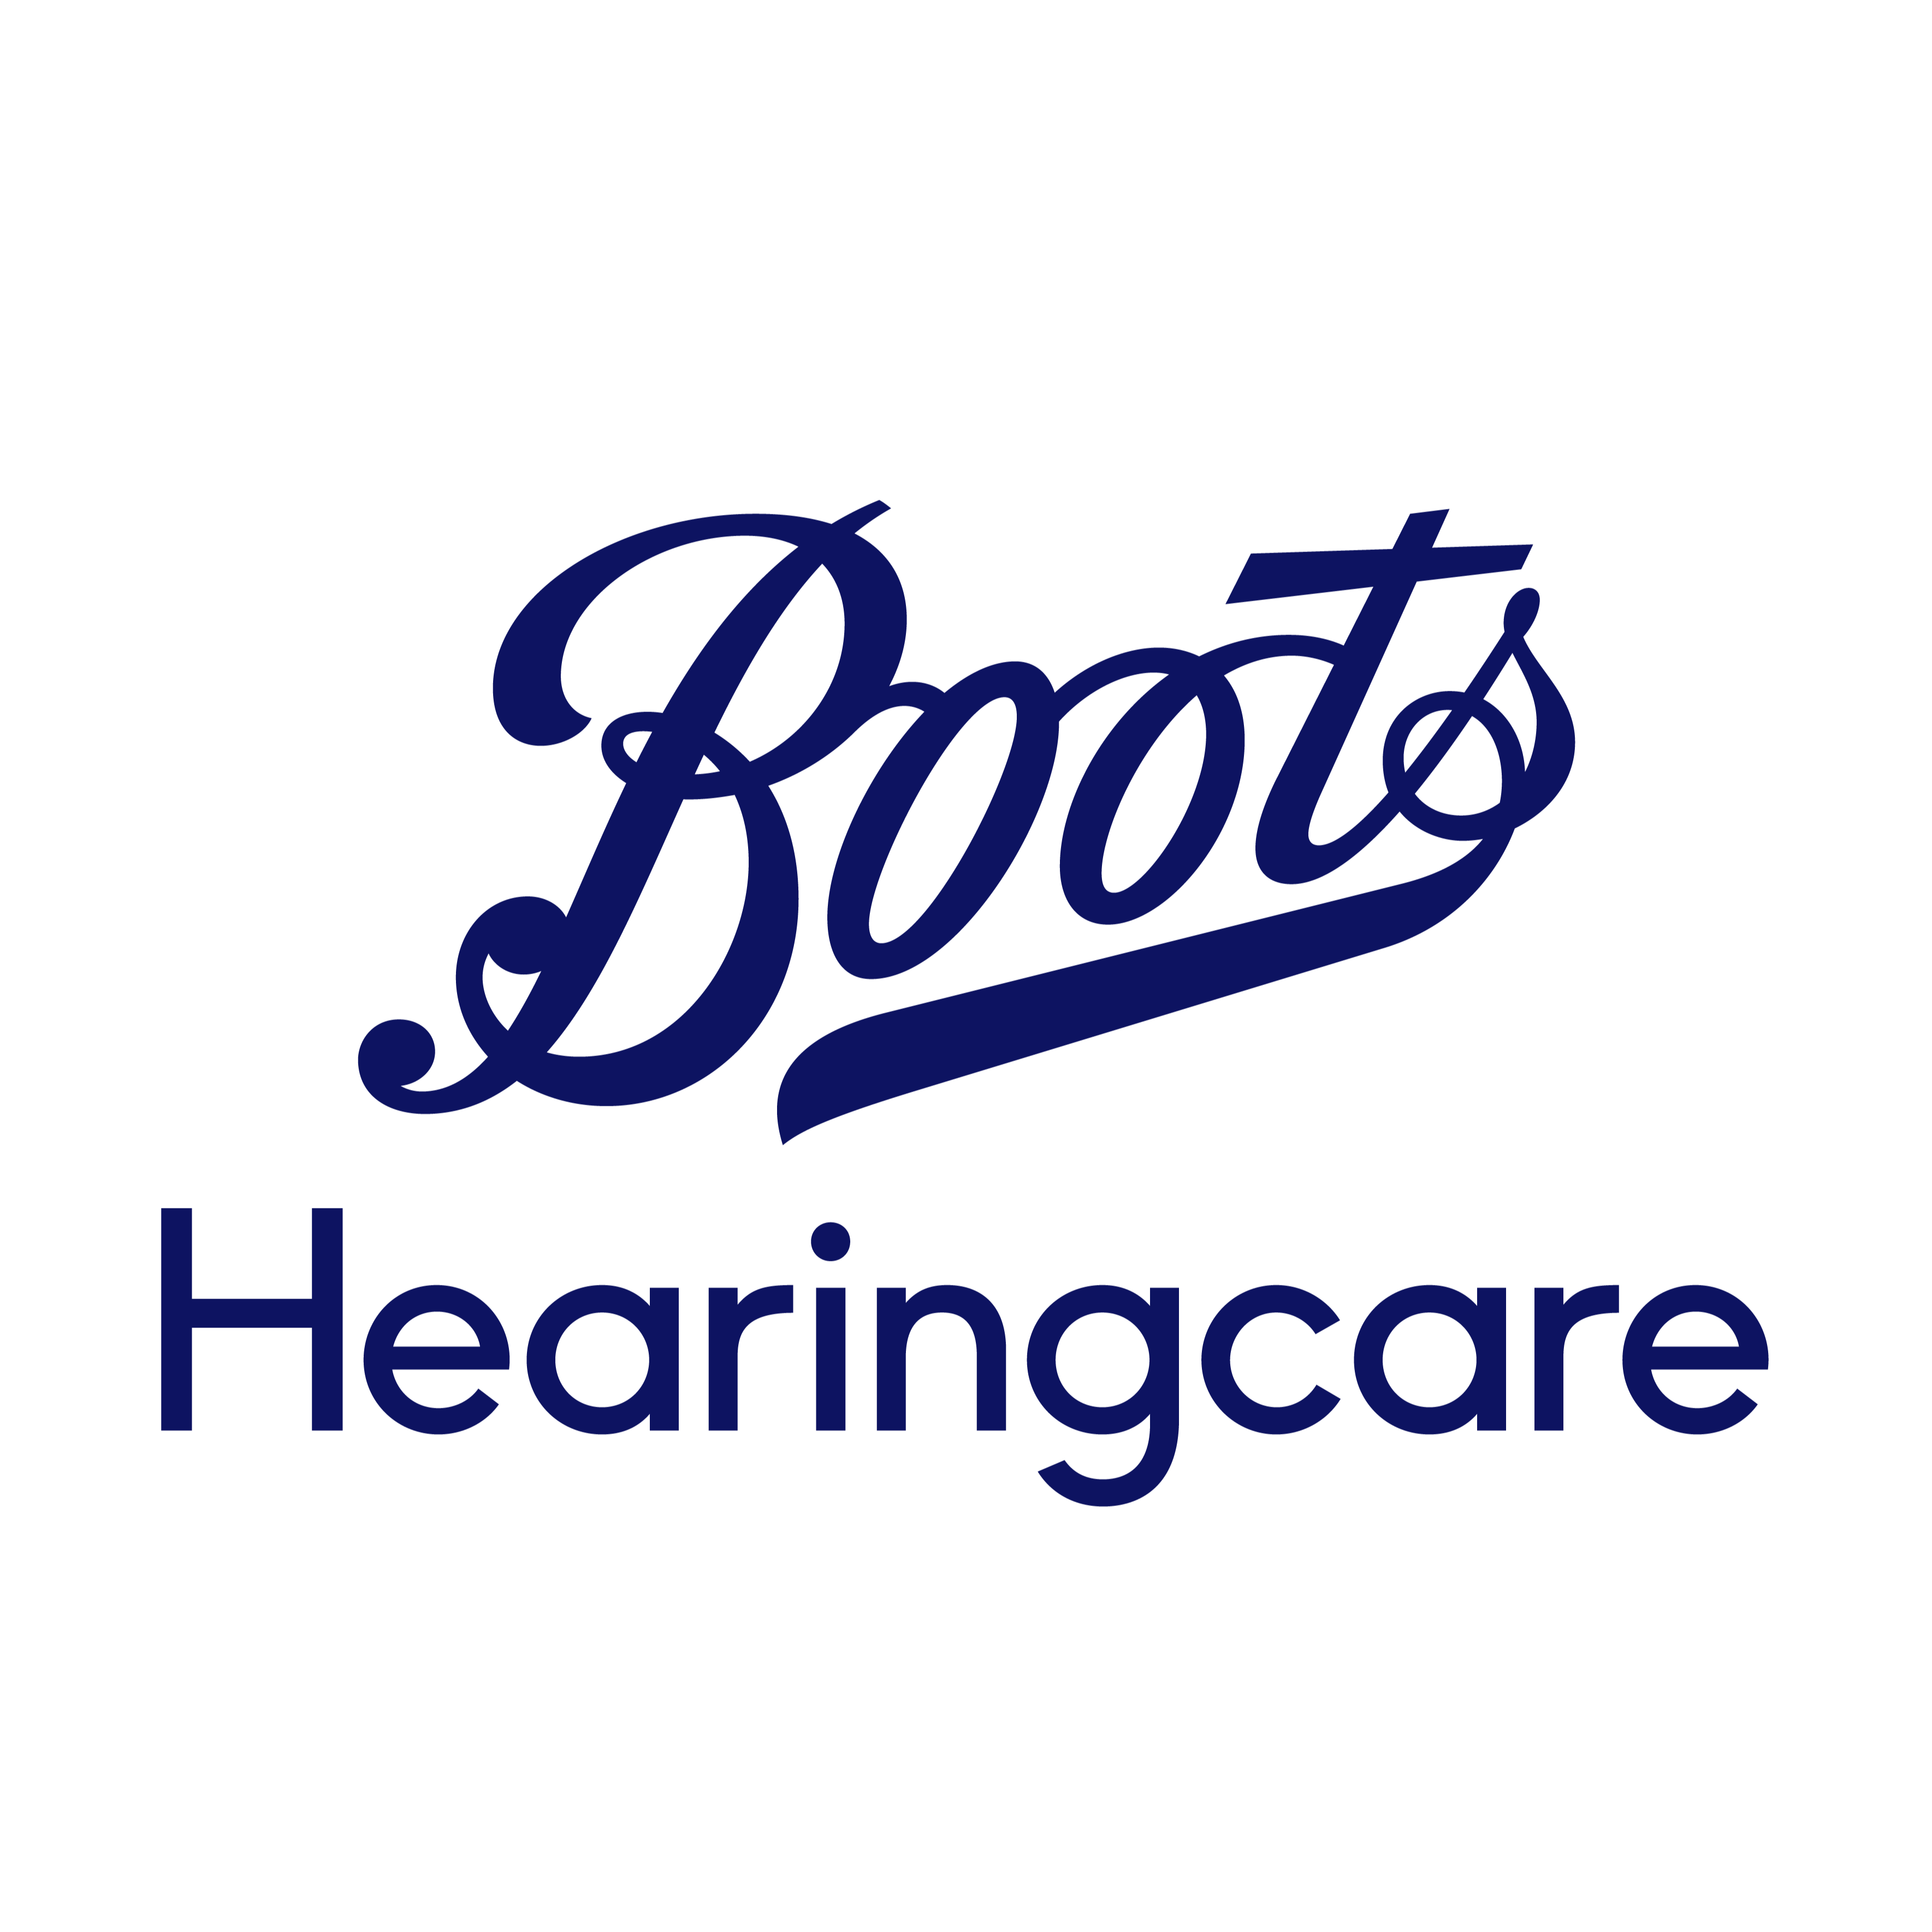 Boots Hearingcare Boots Hearingcare Chelmsford (World Of Hearing) Chelmsford 03452 701600